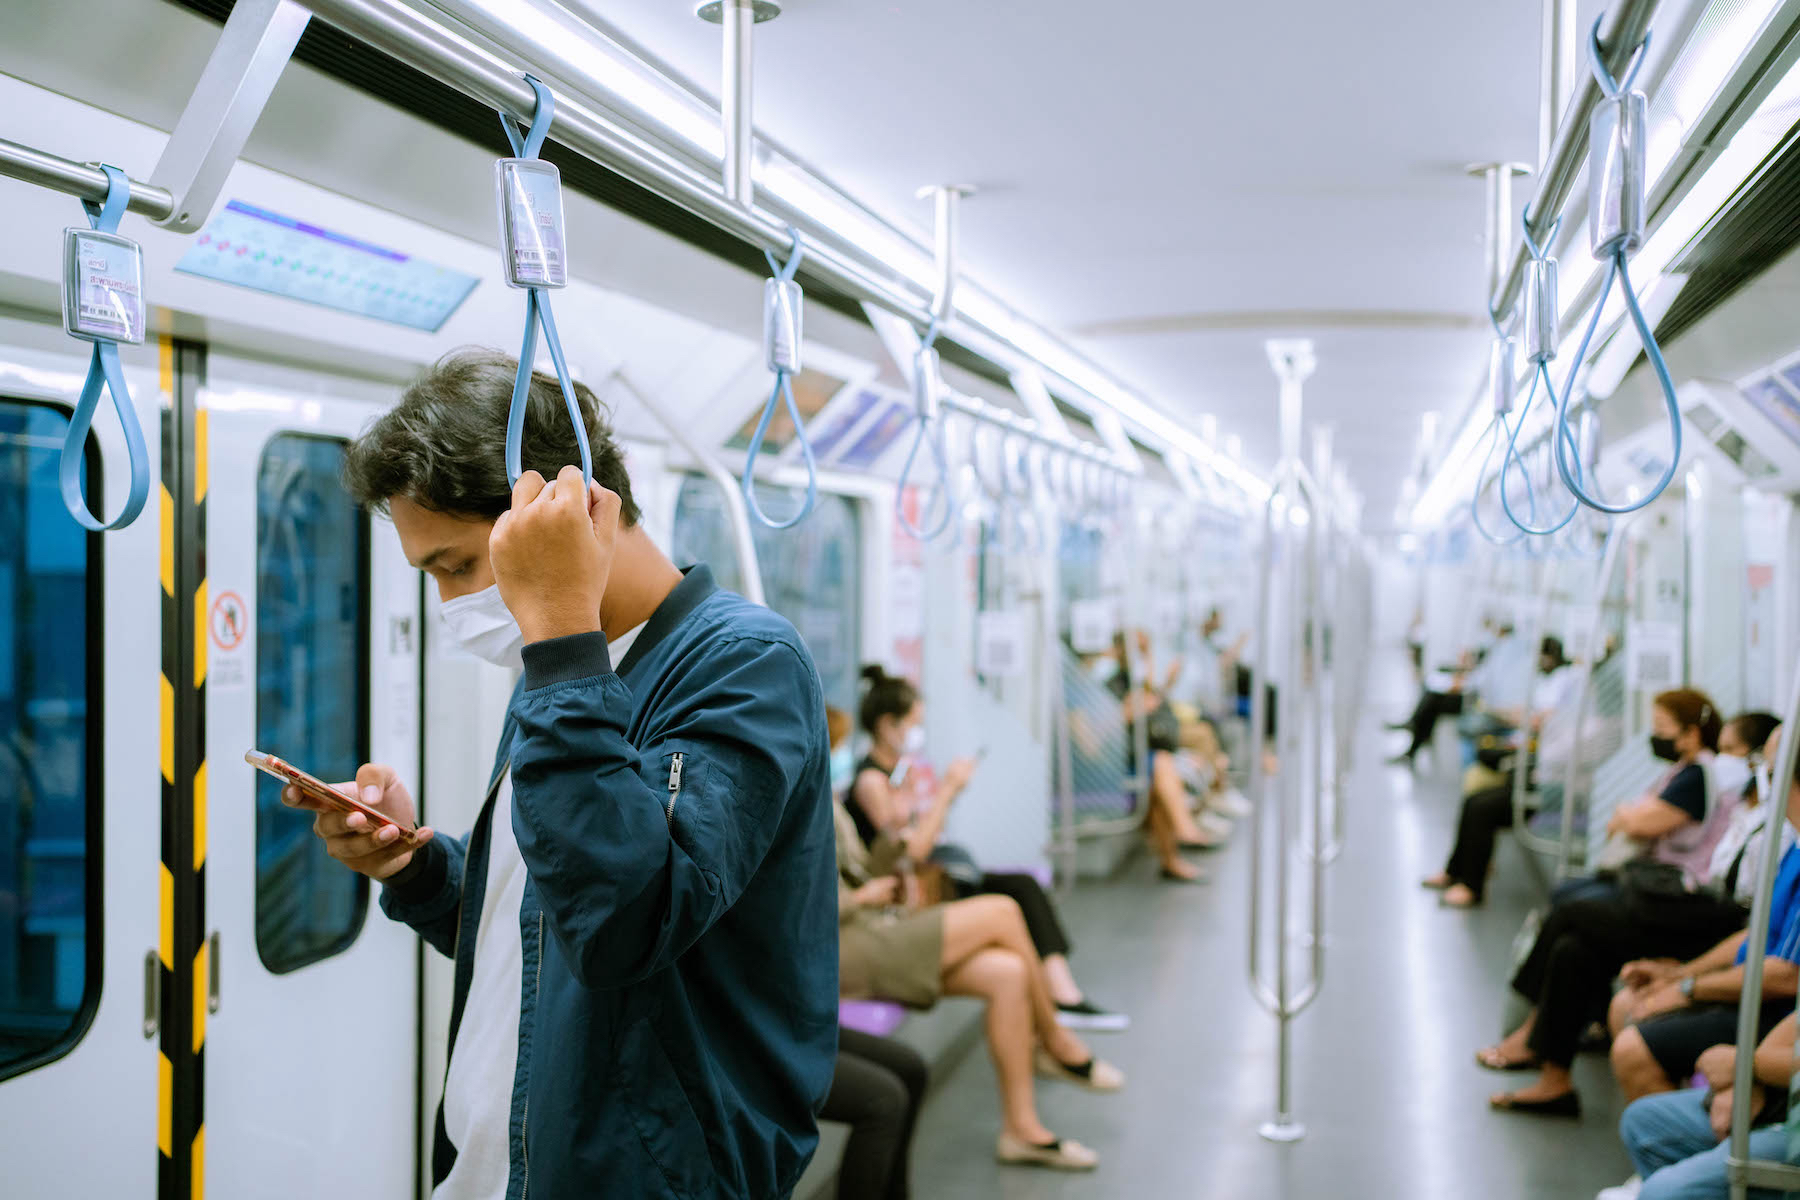 A man stands on a Thai subway train wearing a protective face mask and looking down at his phone
